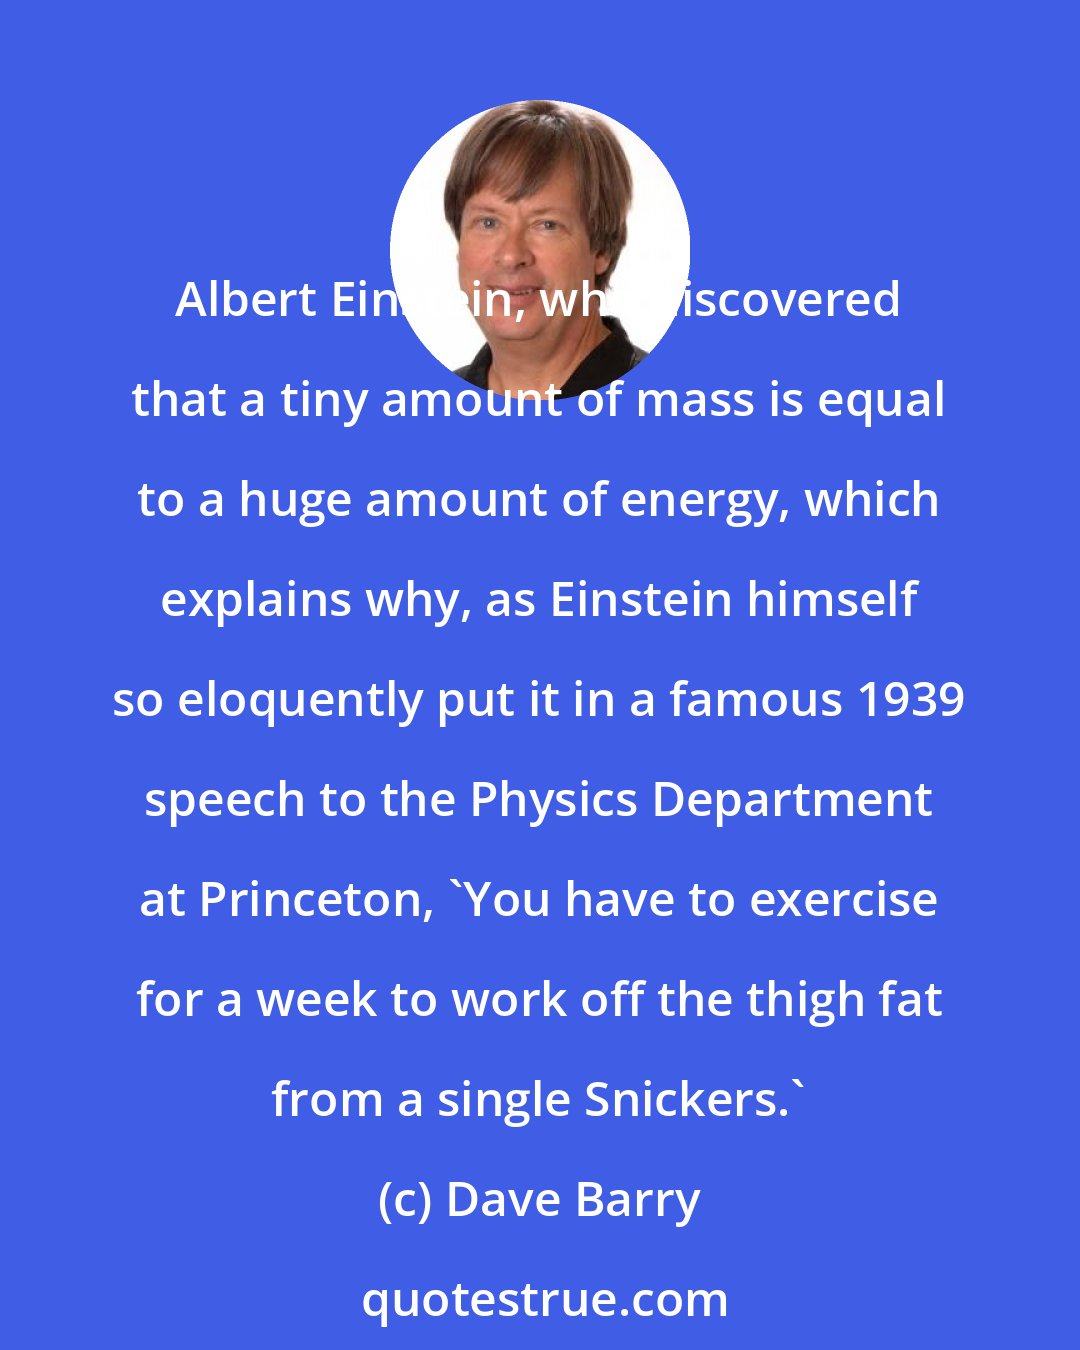 Dave Barry: Albert Einstein, who discovered that a tiny amount of mass is equal to a huge amount of energy, which explains why, as Einstein himself so eloquently put it in a famous 1939 speech to the Physics Department at Princeton, 'You have to exercise for a week to work off the thigh fat from a single Snickers.'